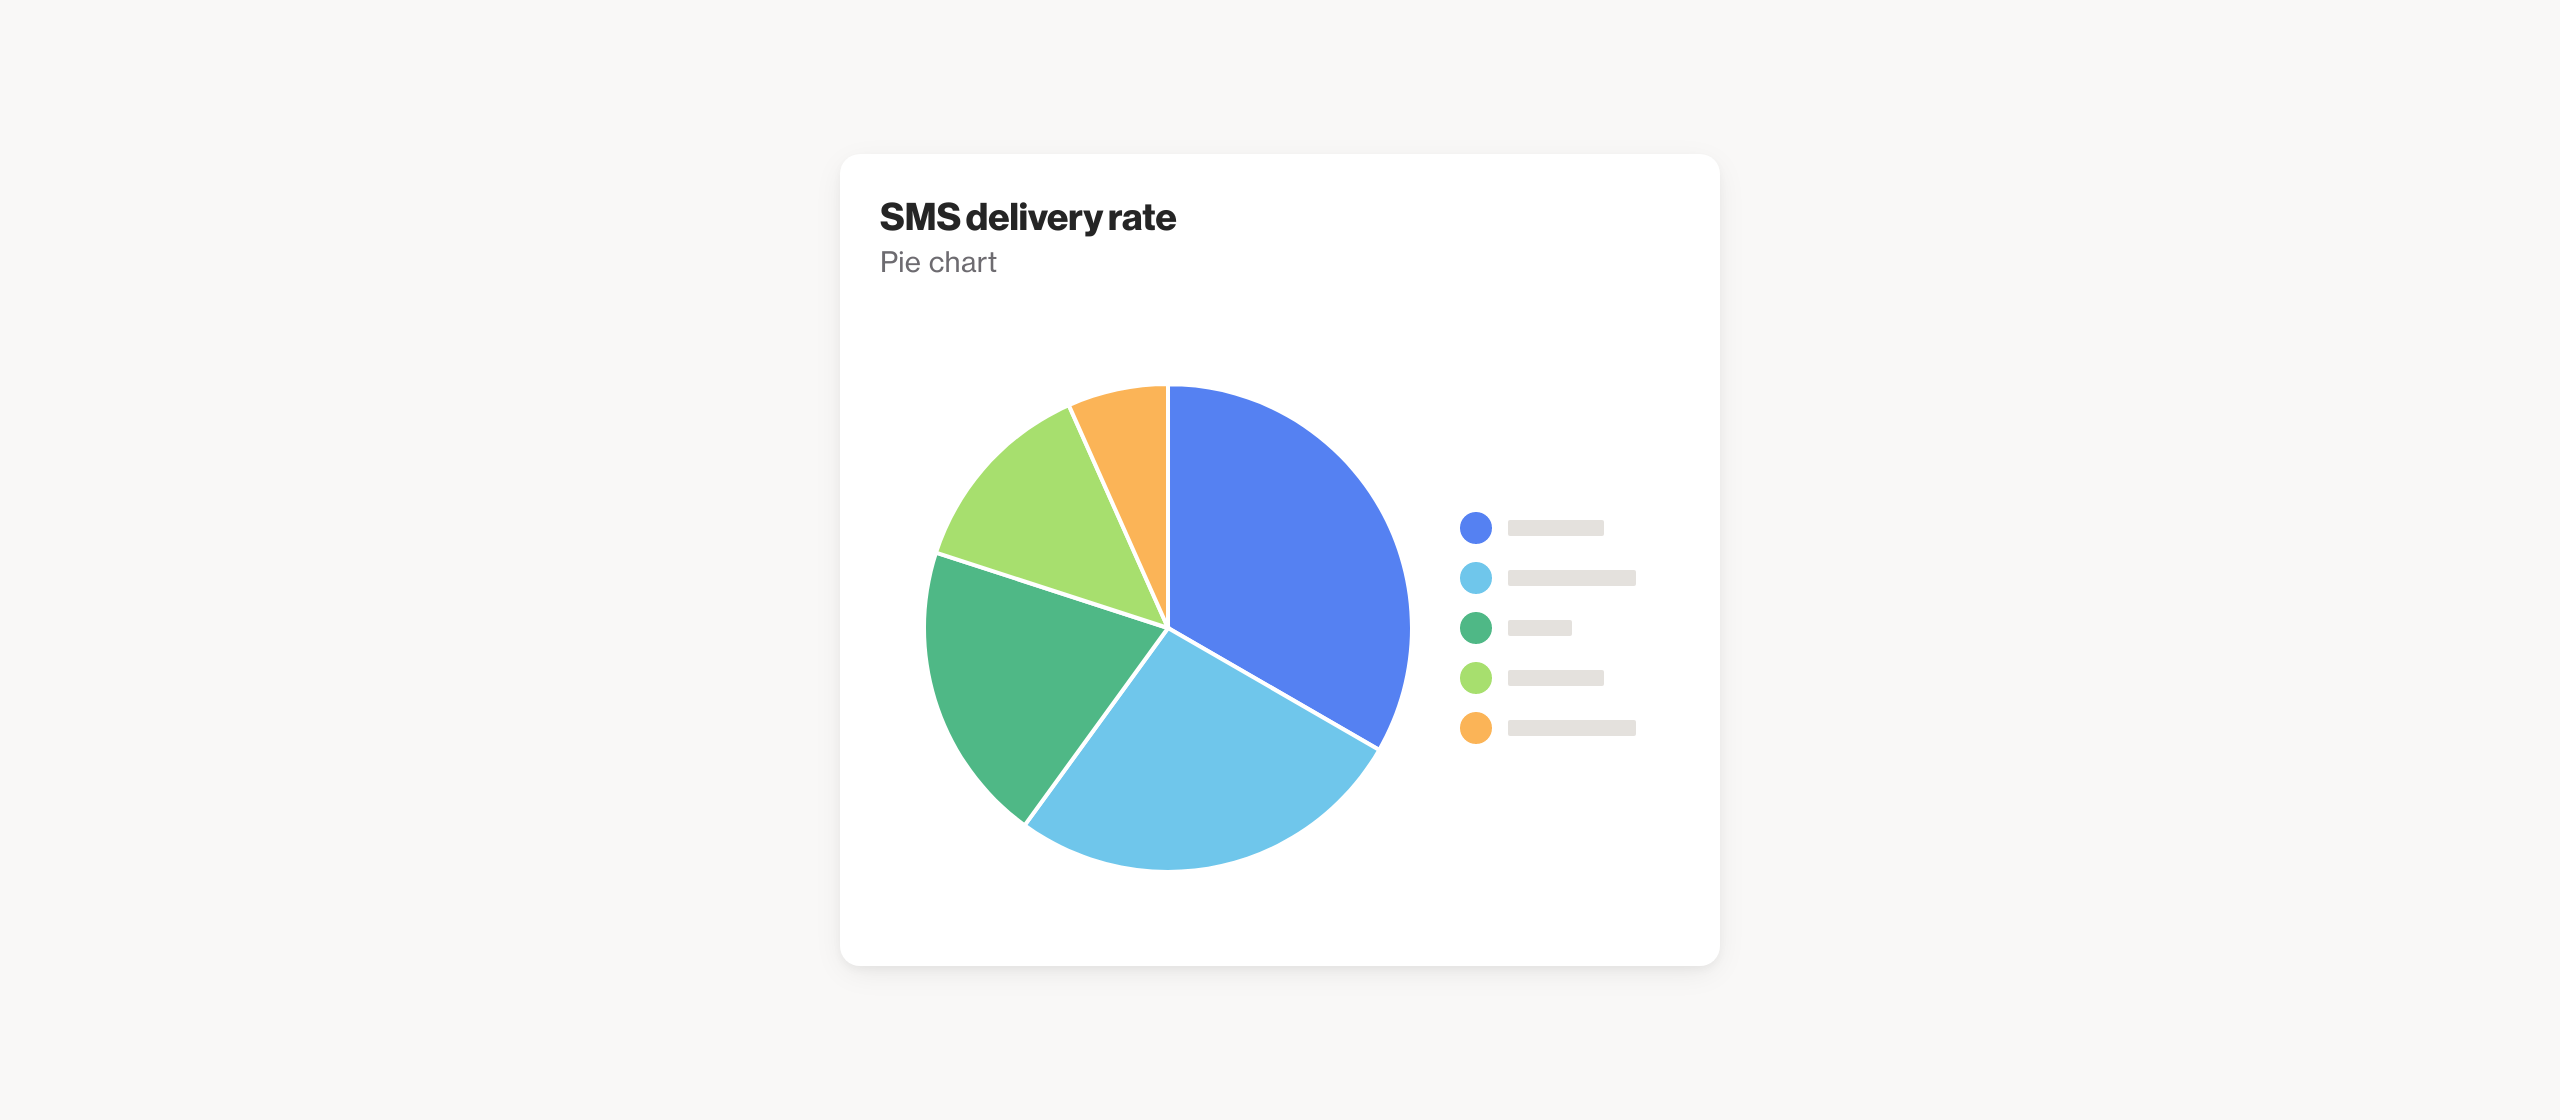 SMS delivery rate